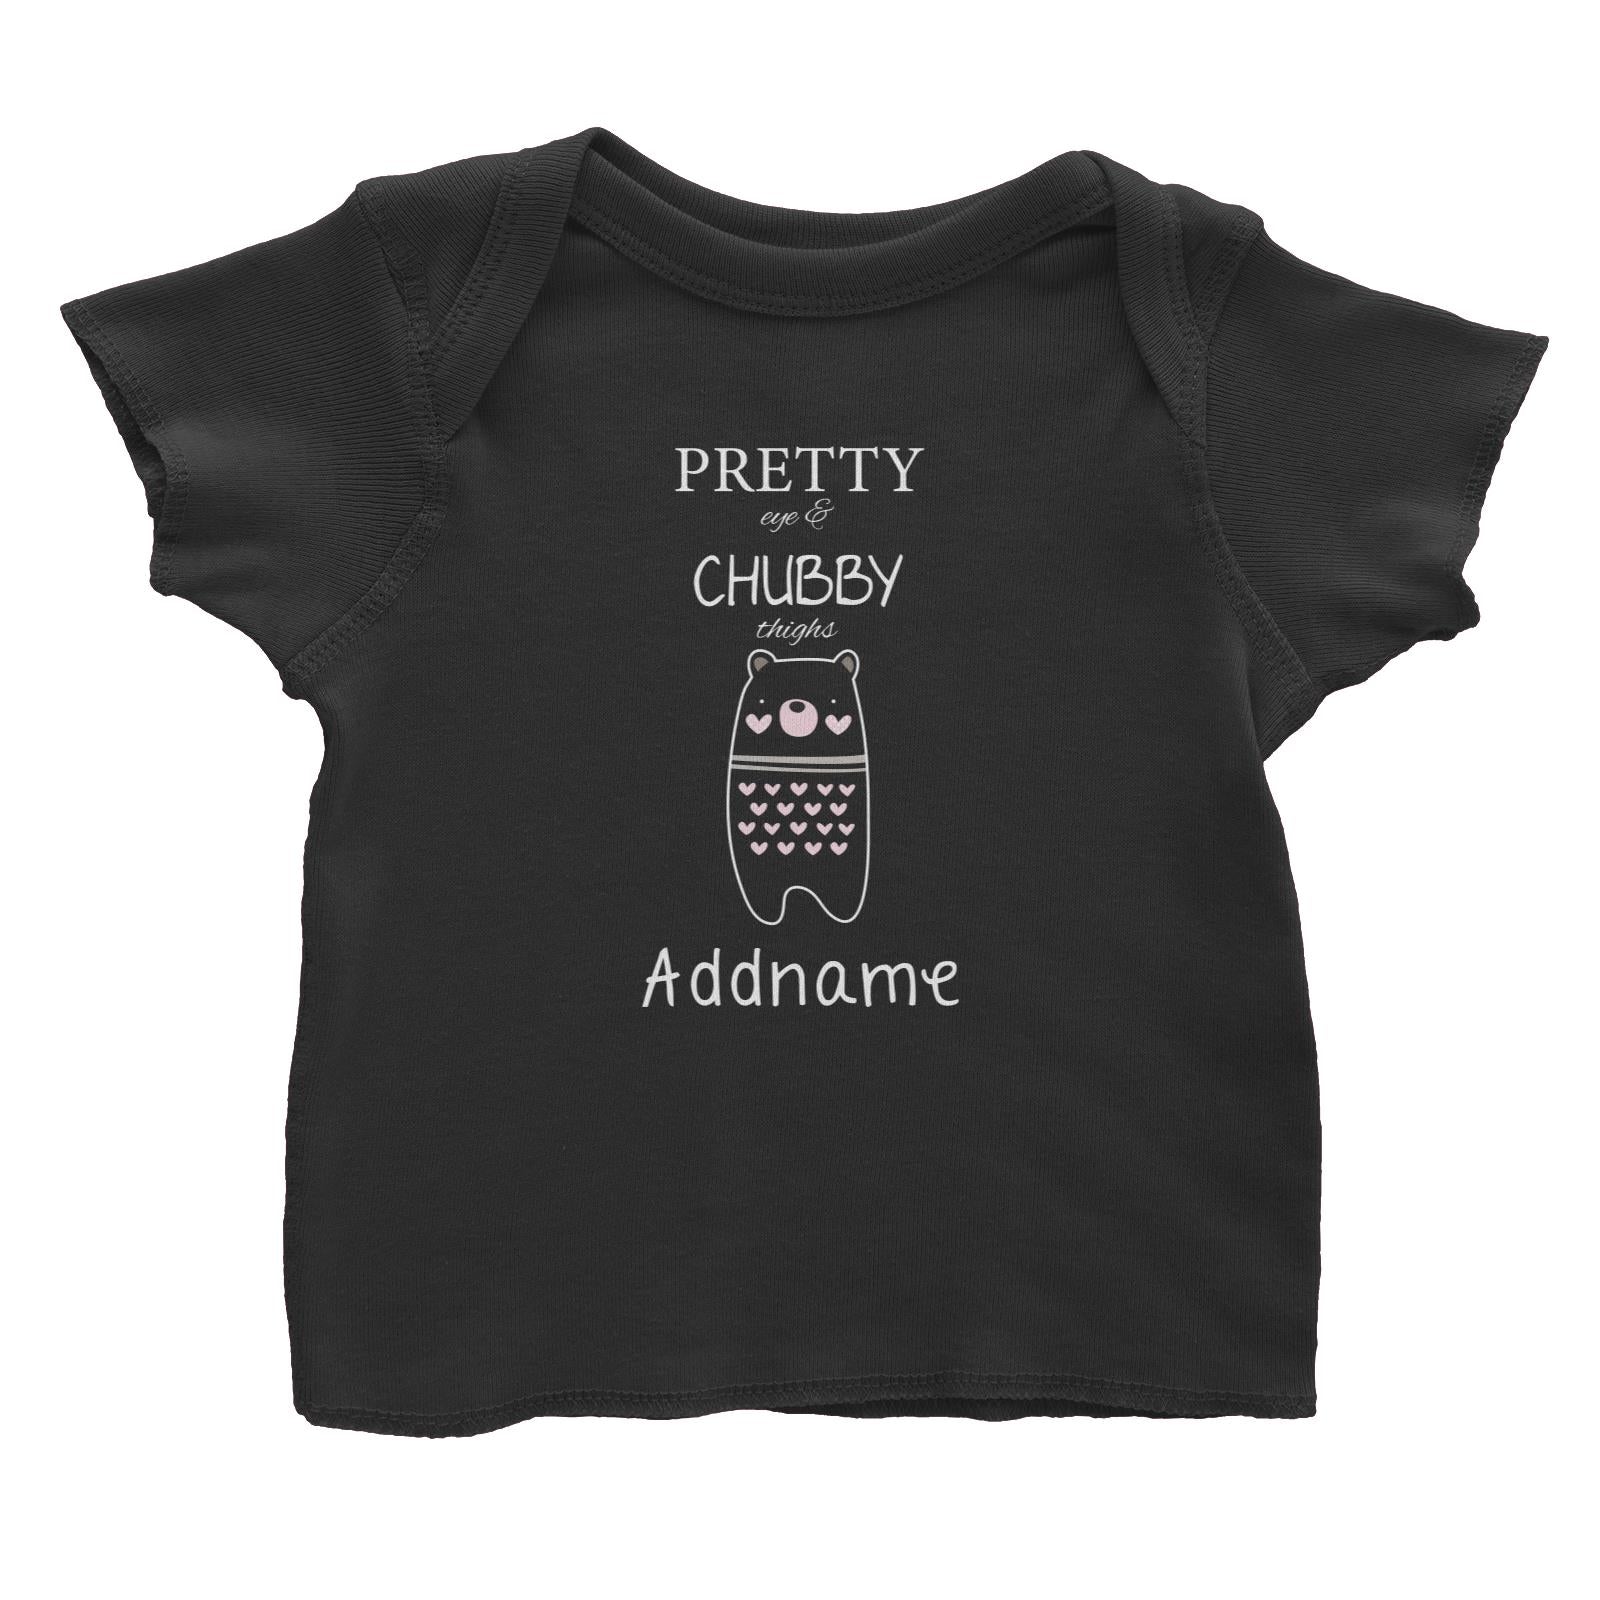 Cute Animals and Friends Series 2 Bear Pretty Eyes & Chubby Things Addname Baby T-Shirt